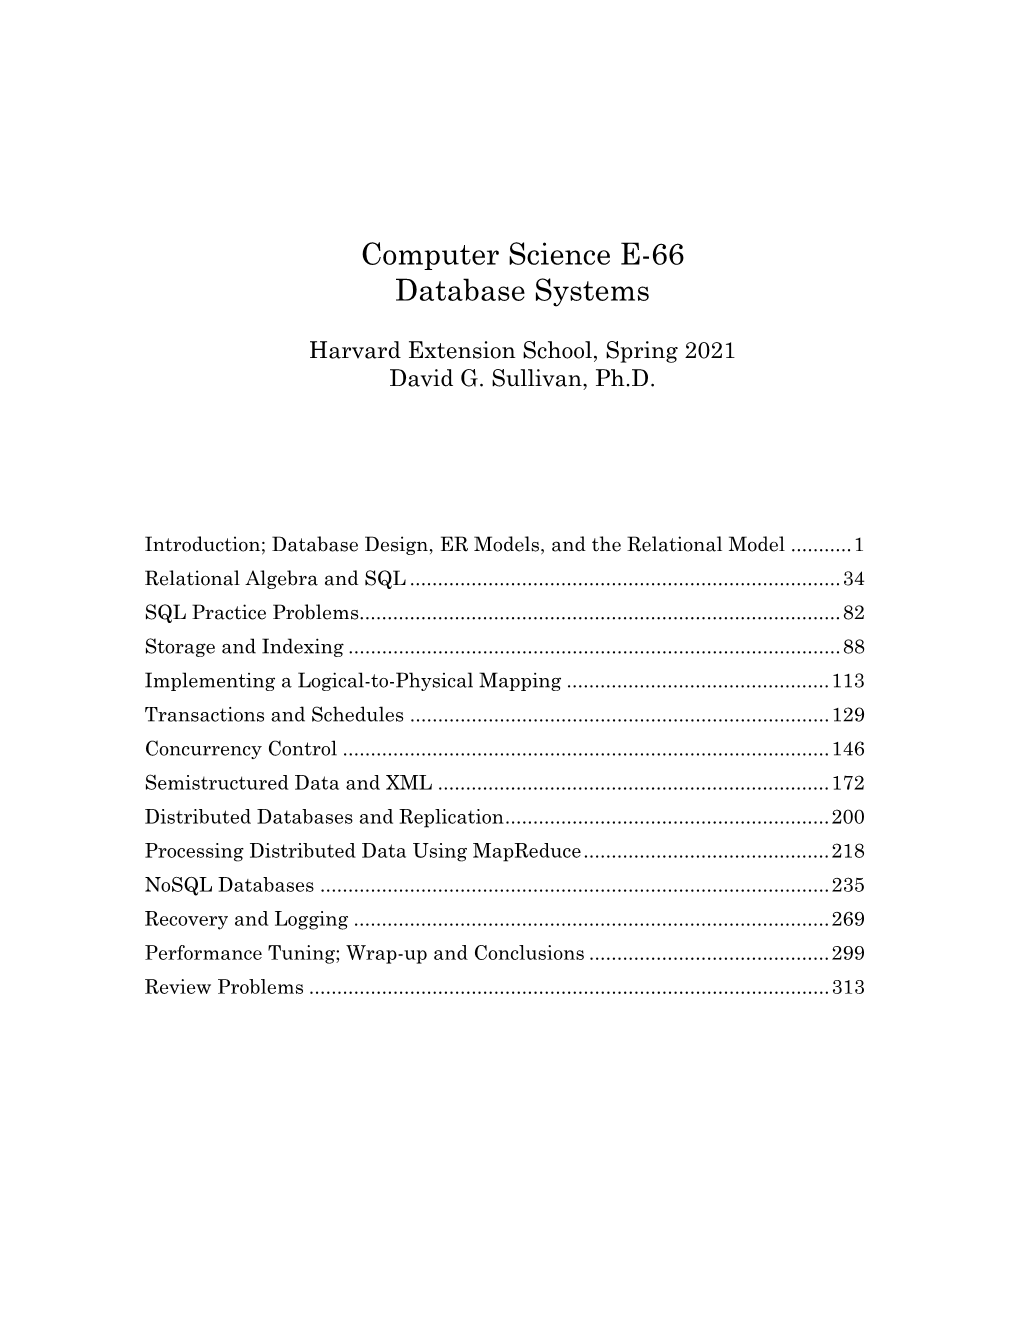 Computer Science E-66 Database Systems